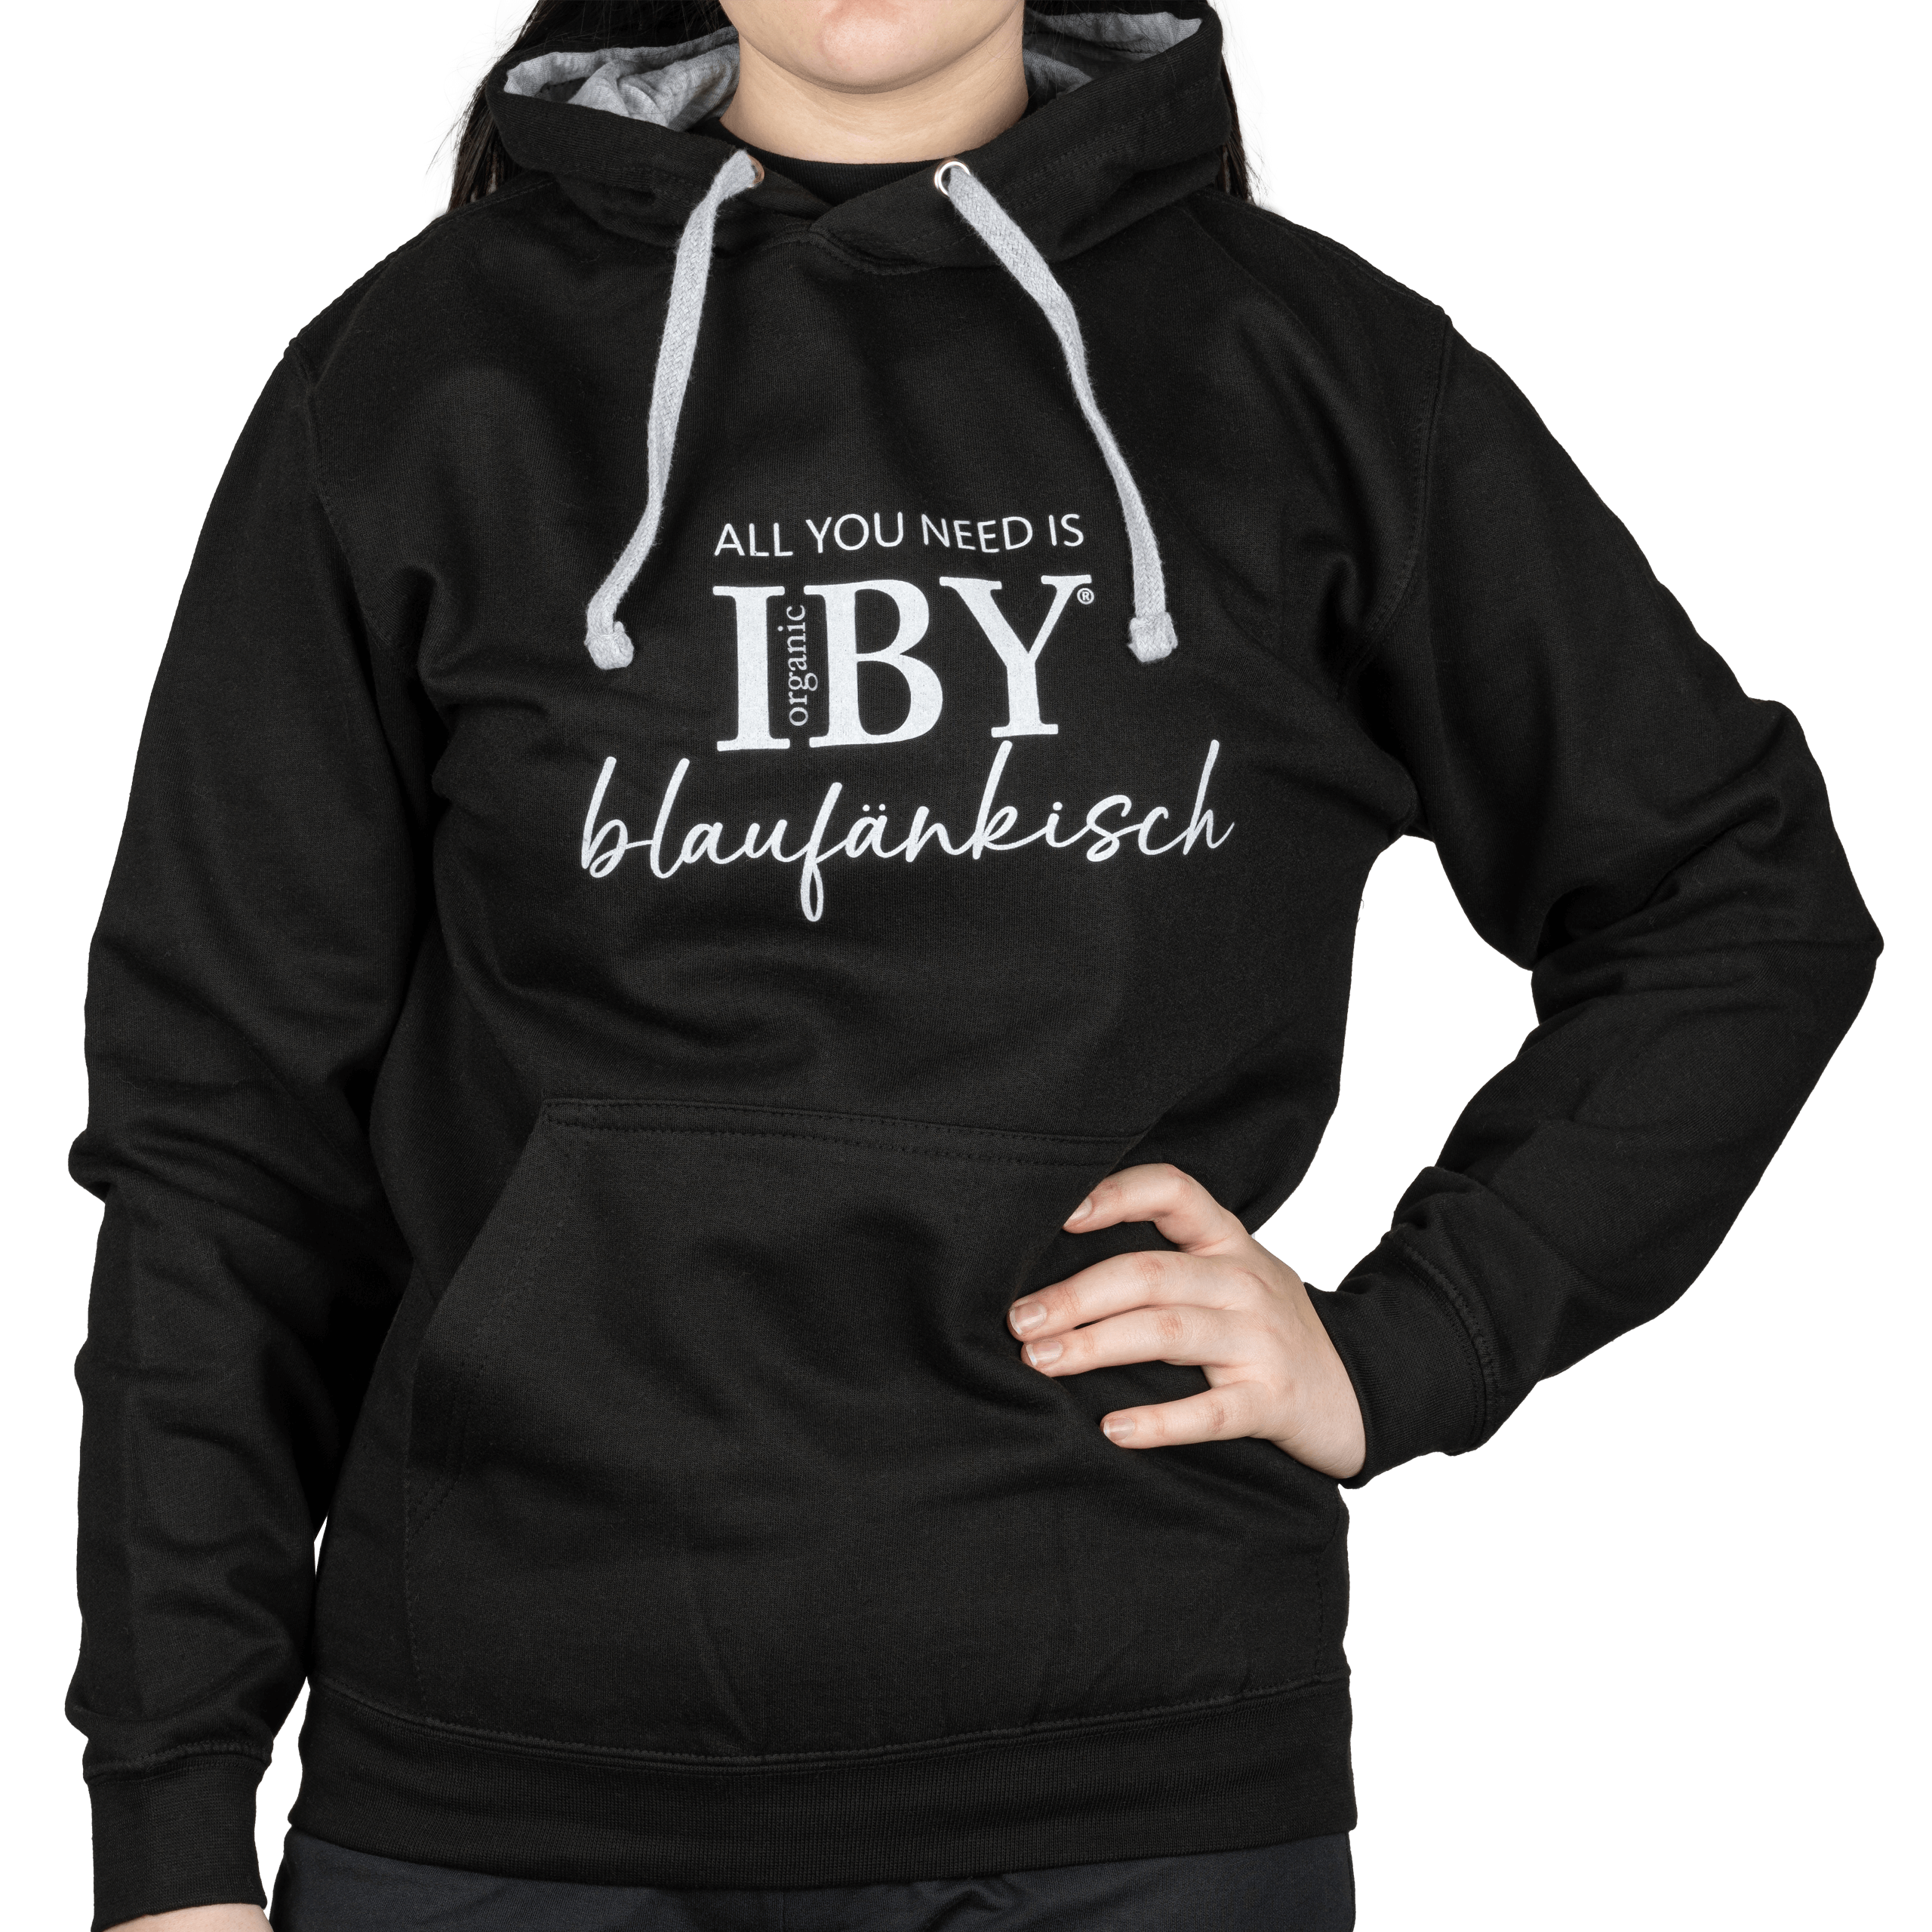 IBY Pullover